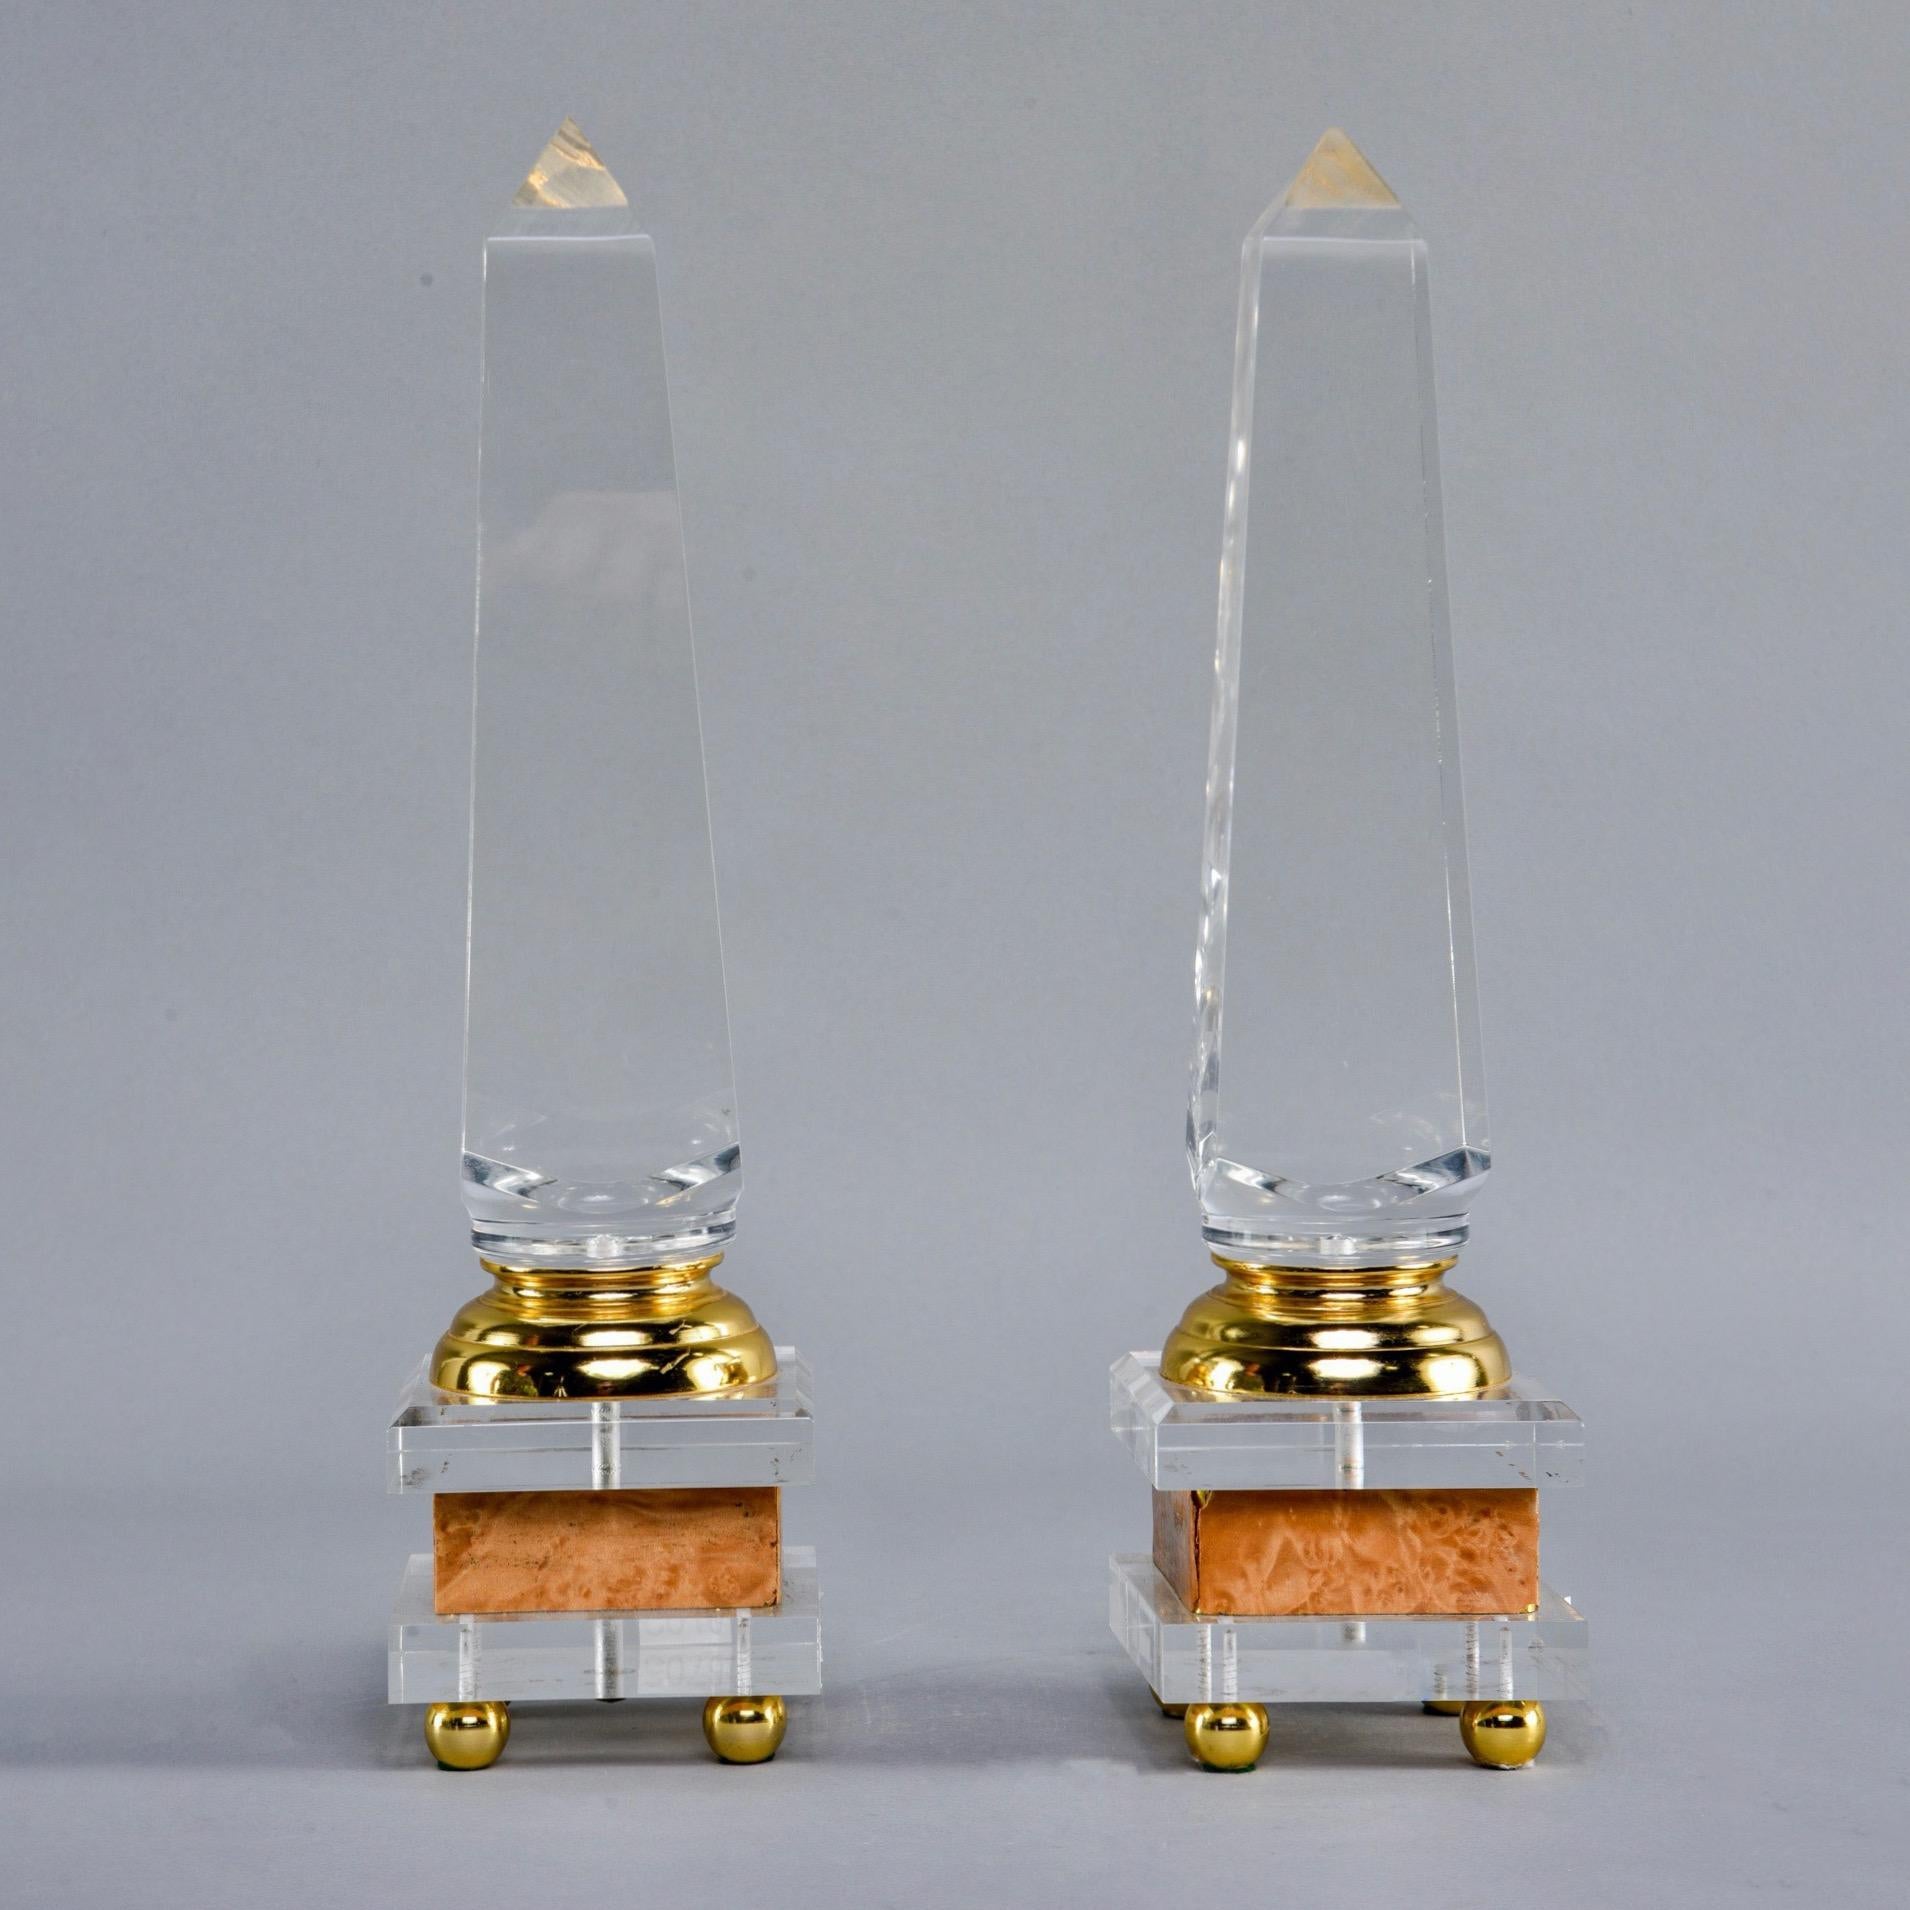 Pair of decorative Lucite and brass footed obelisks in manner of Maison Jansen, circa 1980s. Found in France. Unknown maker. Base has round brass feet, faux stone band and brass accents. This pair stands just over 15” tall. At the time of this